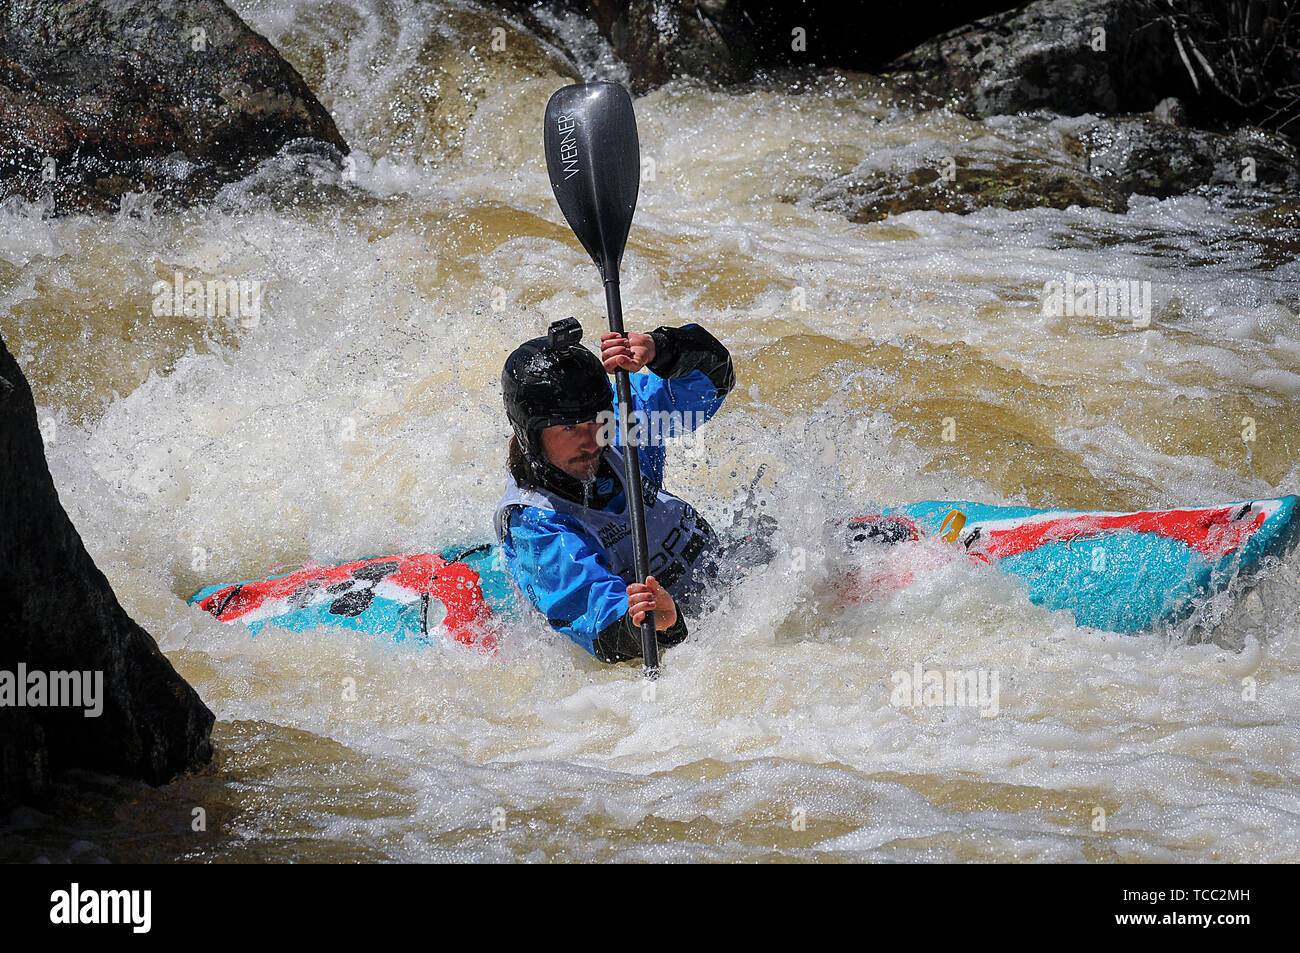 Vail, Colorado, USA. June 6, 2019: The Class 5 whitewater of Homestake Creek requires every paddler's full attention during the GoPro Mountain Games. Adventure athletes from around the world gather in Vail, Colorado each summer for North America's largest celebration of adventure sports competition, art, and music. Vail, Colorado. Credit: Cal Sport Media/Alamy Live News Stock Photo